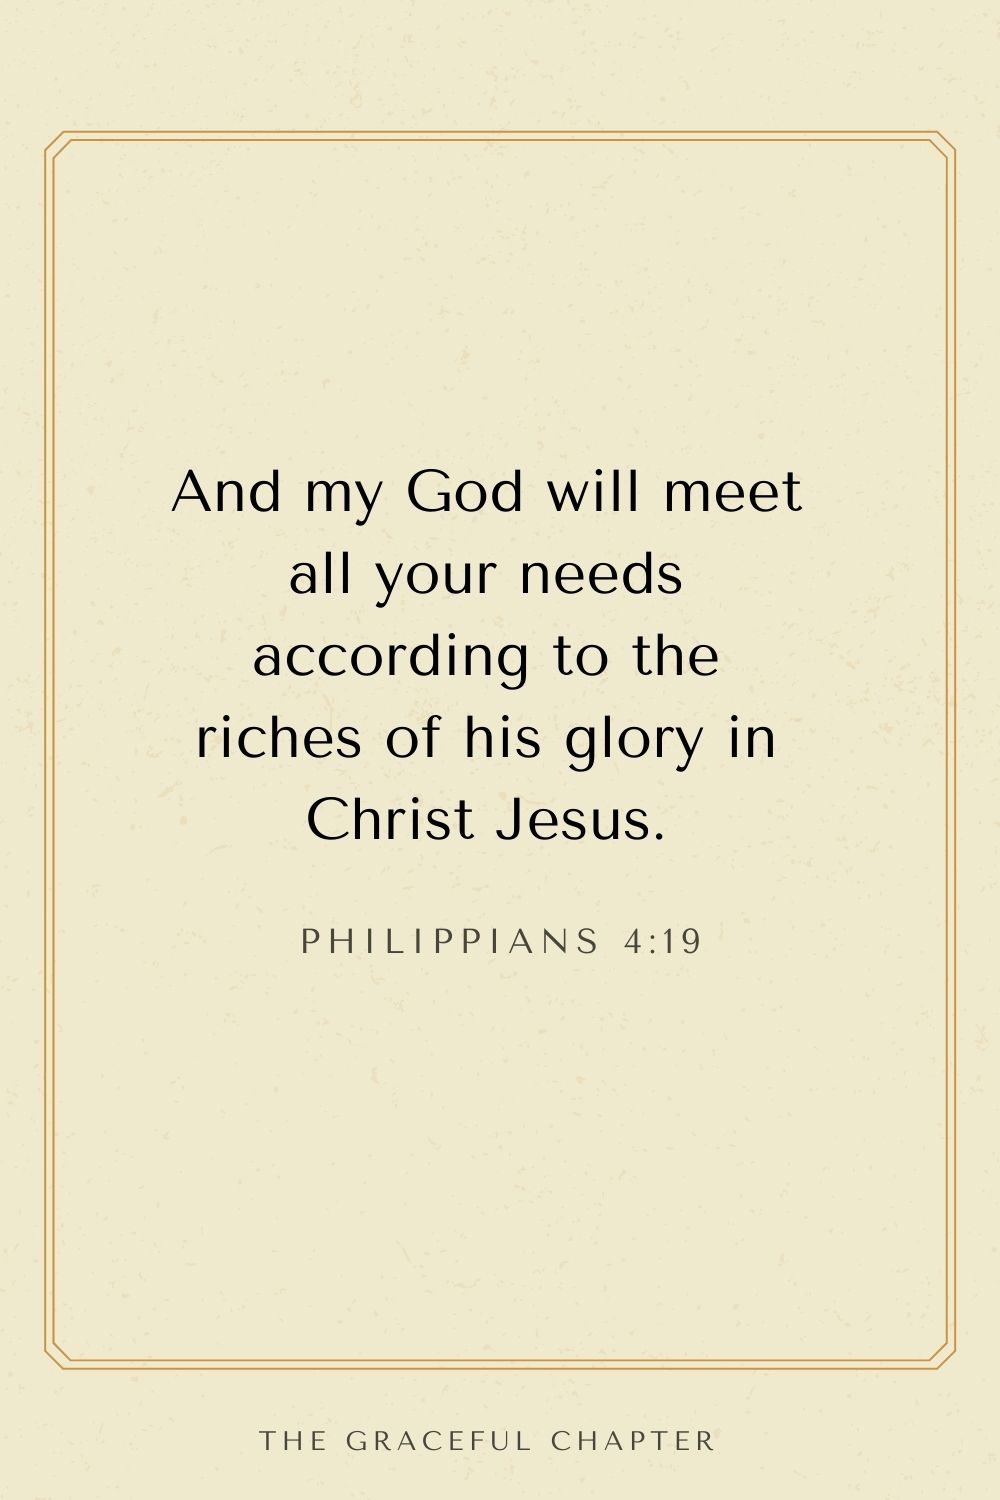 And my God will meet all your needs according to the riches of his glory in Christ Jesus. Philippians 4:19